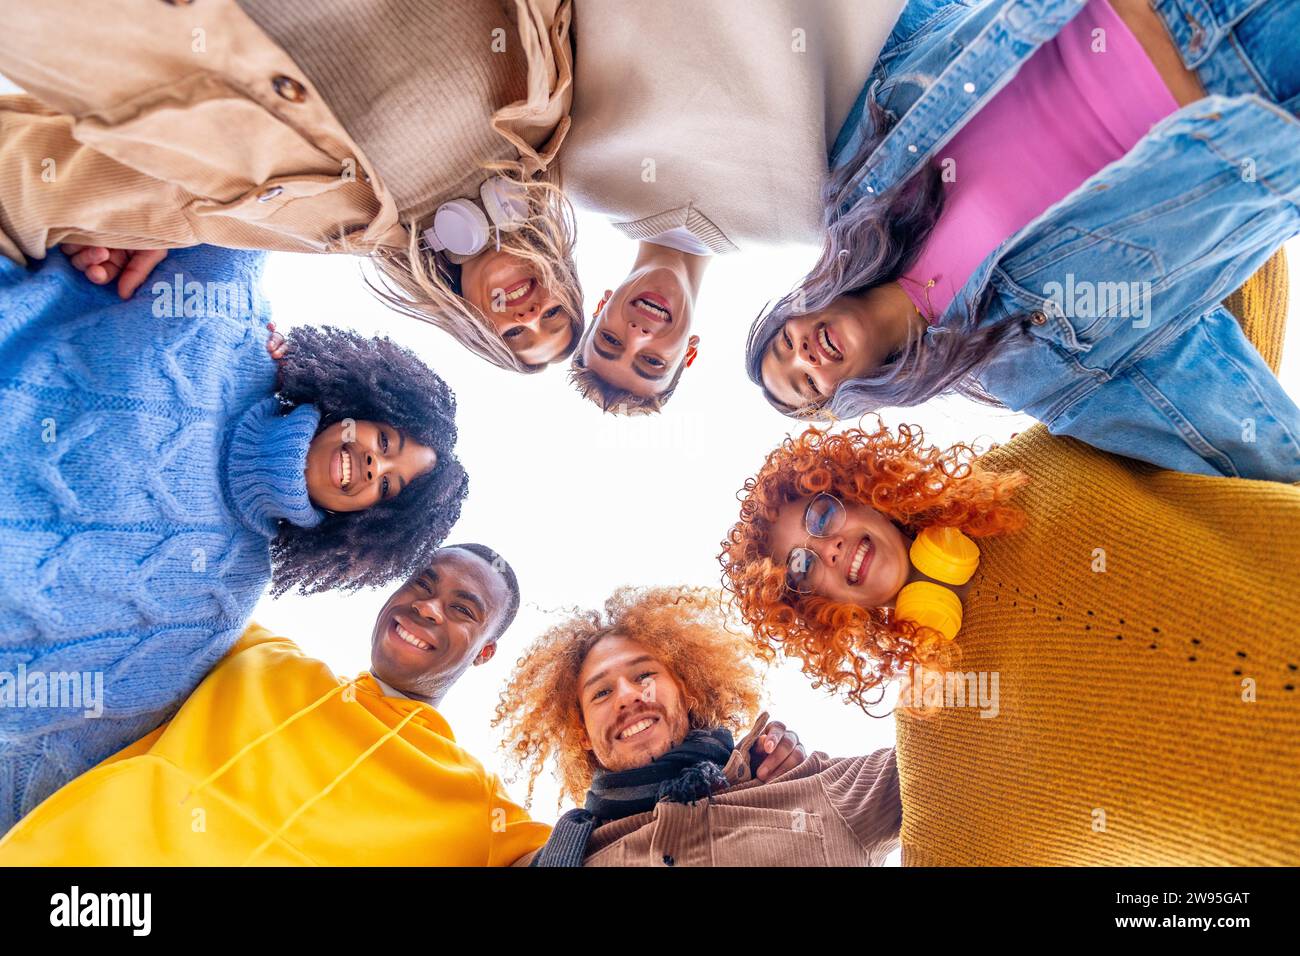 Low angle view of multi-ethnic people forming a circle and smiling at camera Stock Photo